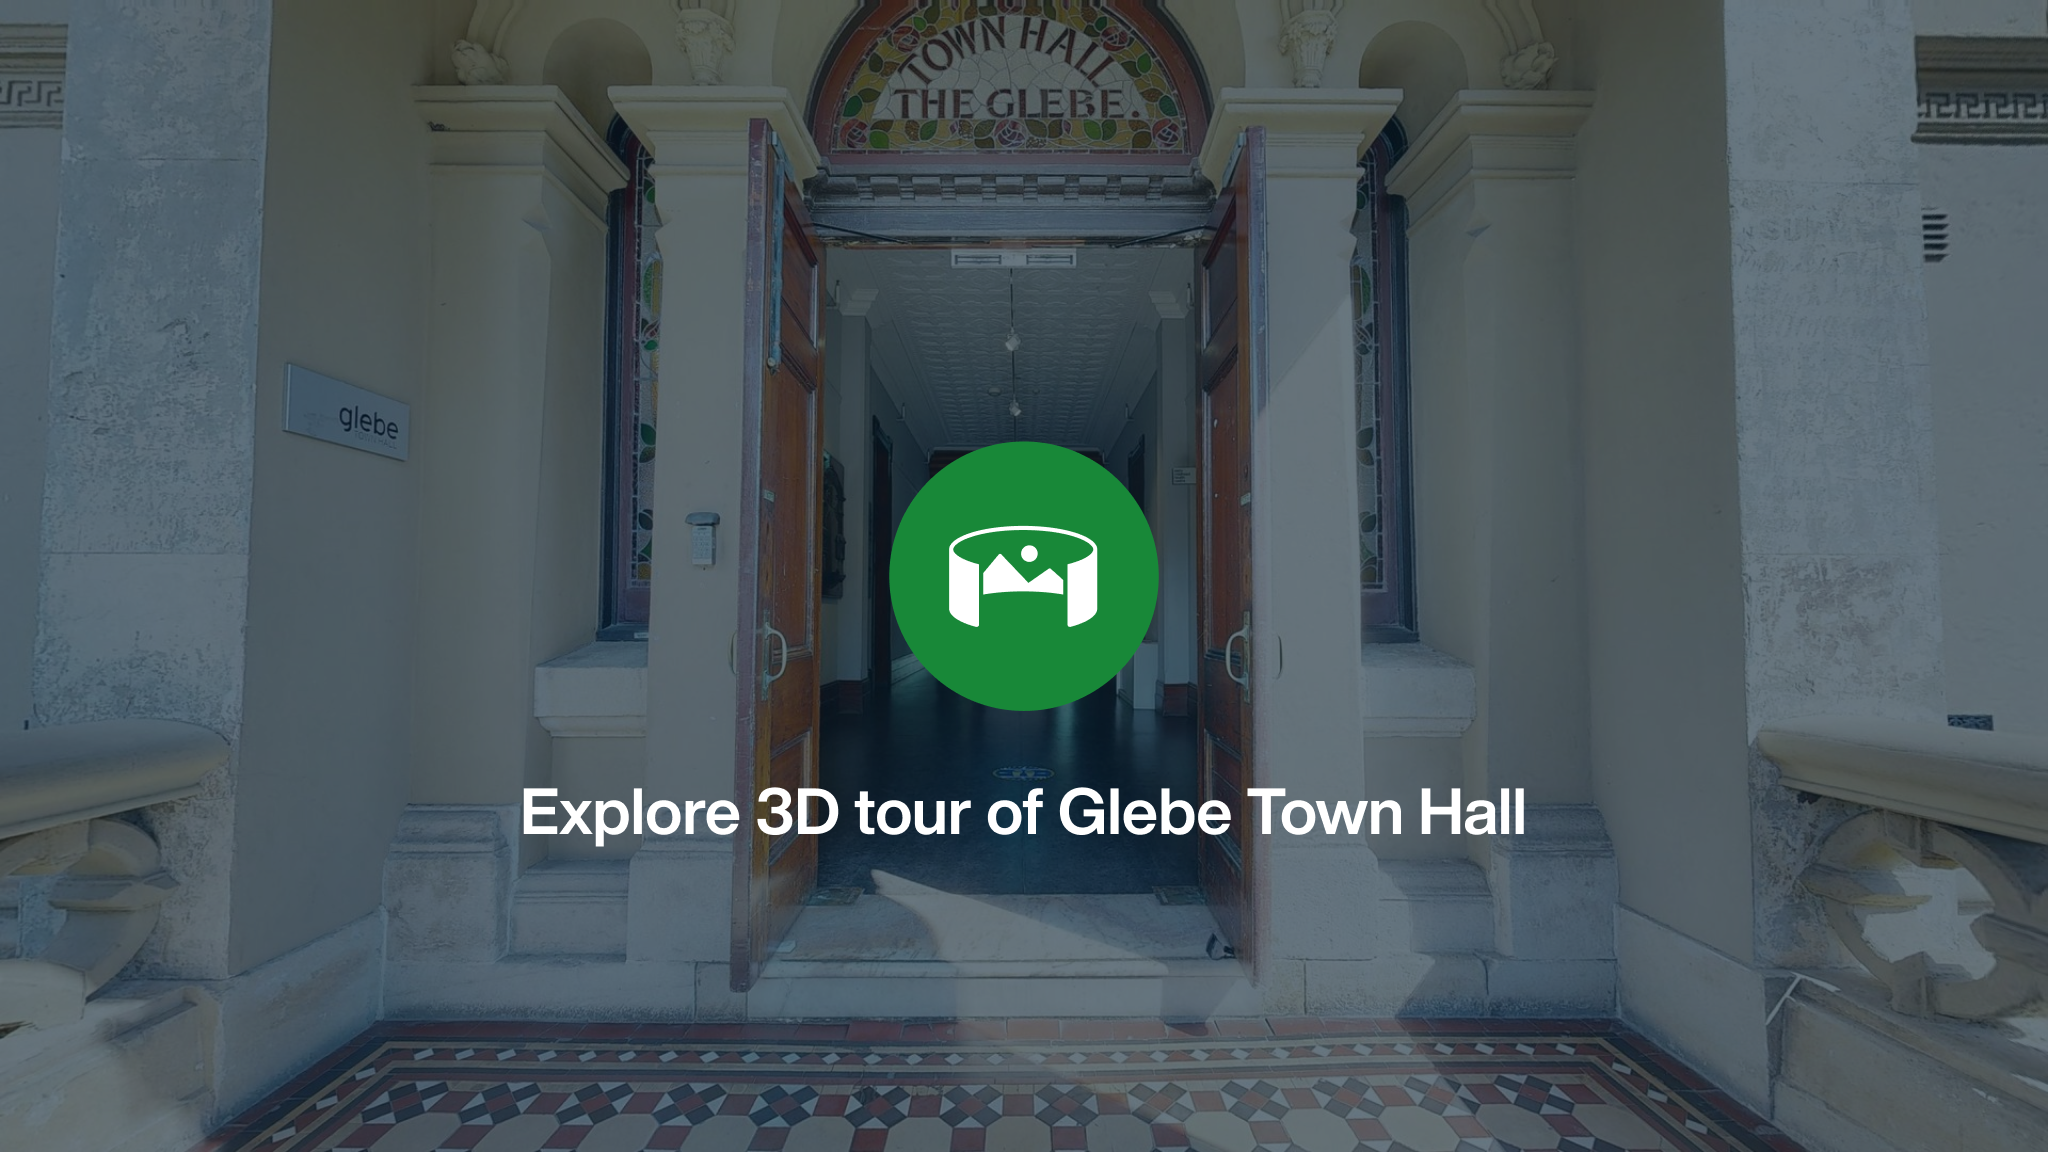 The front entrance to Glebe Town Hall overlayed with a green icon and the words Explore 3D tour of Glebe Town Hall.